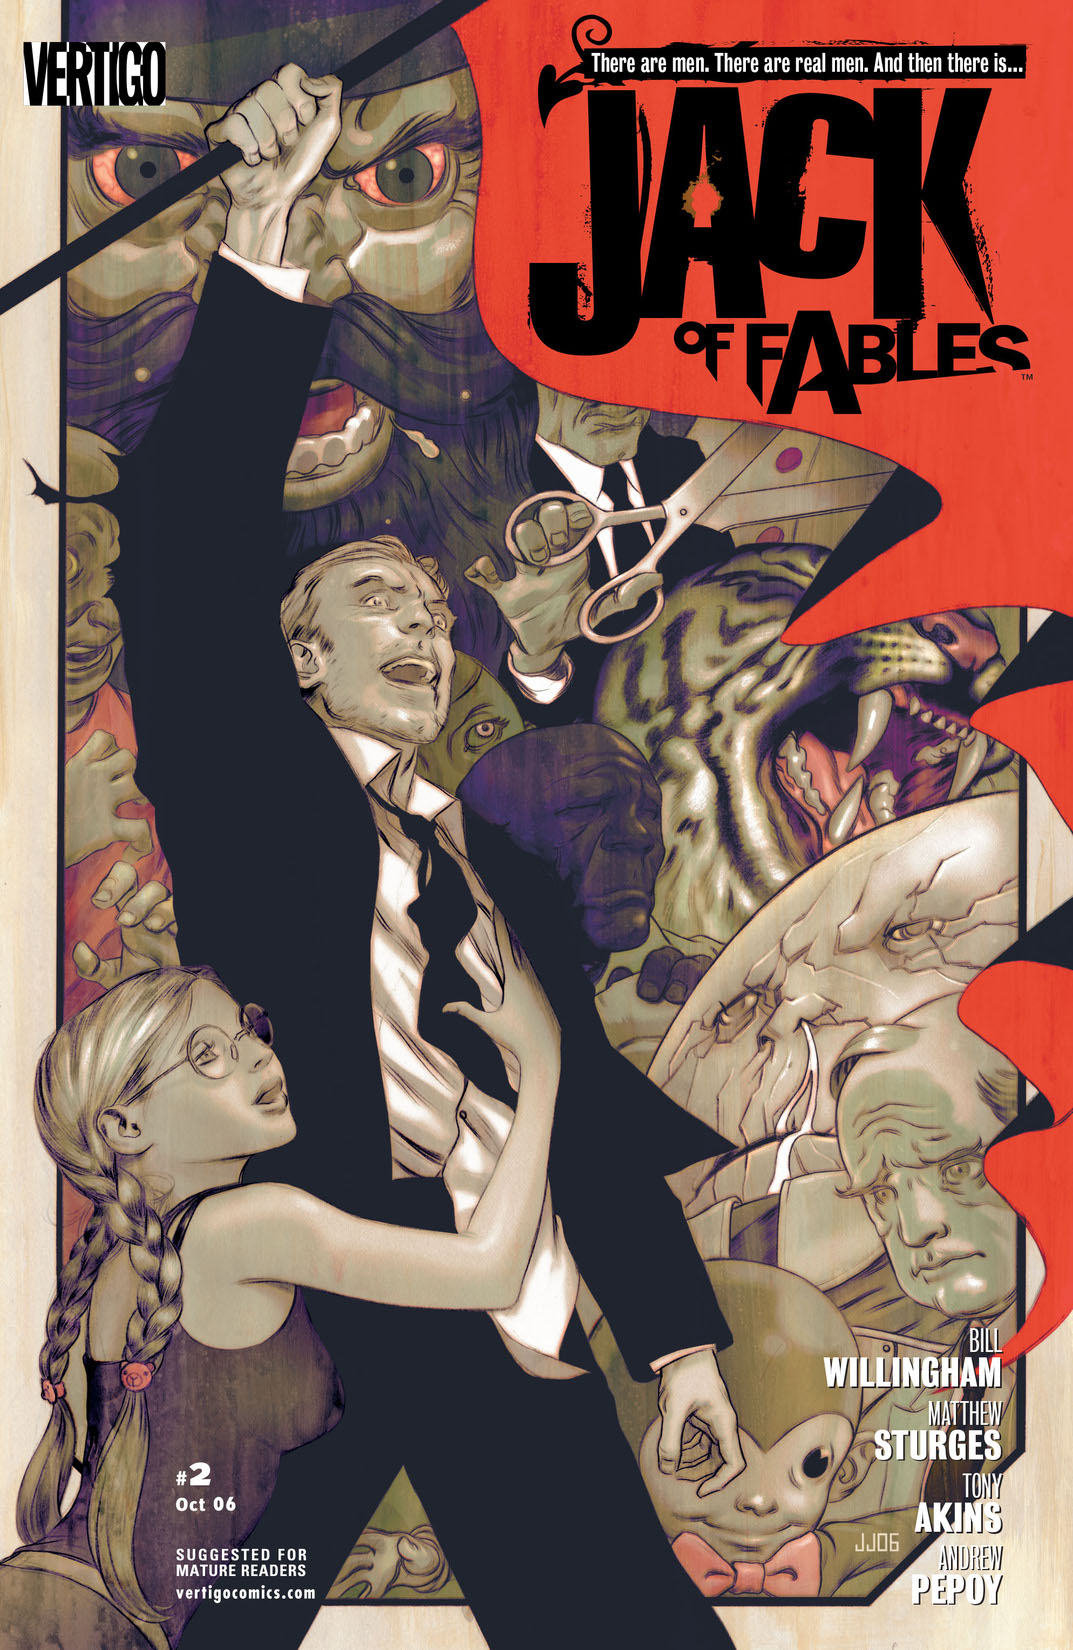 Jack of Fables #2 preview images